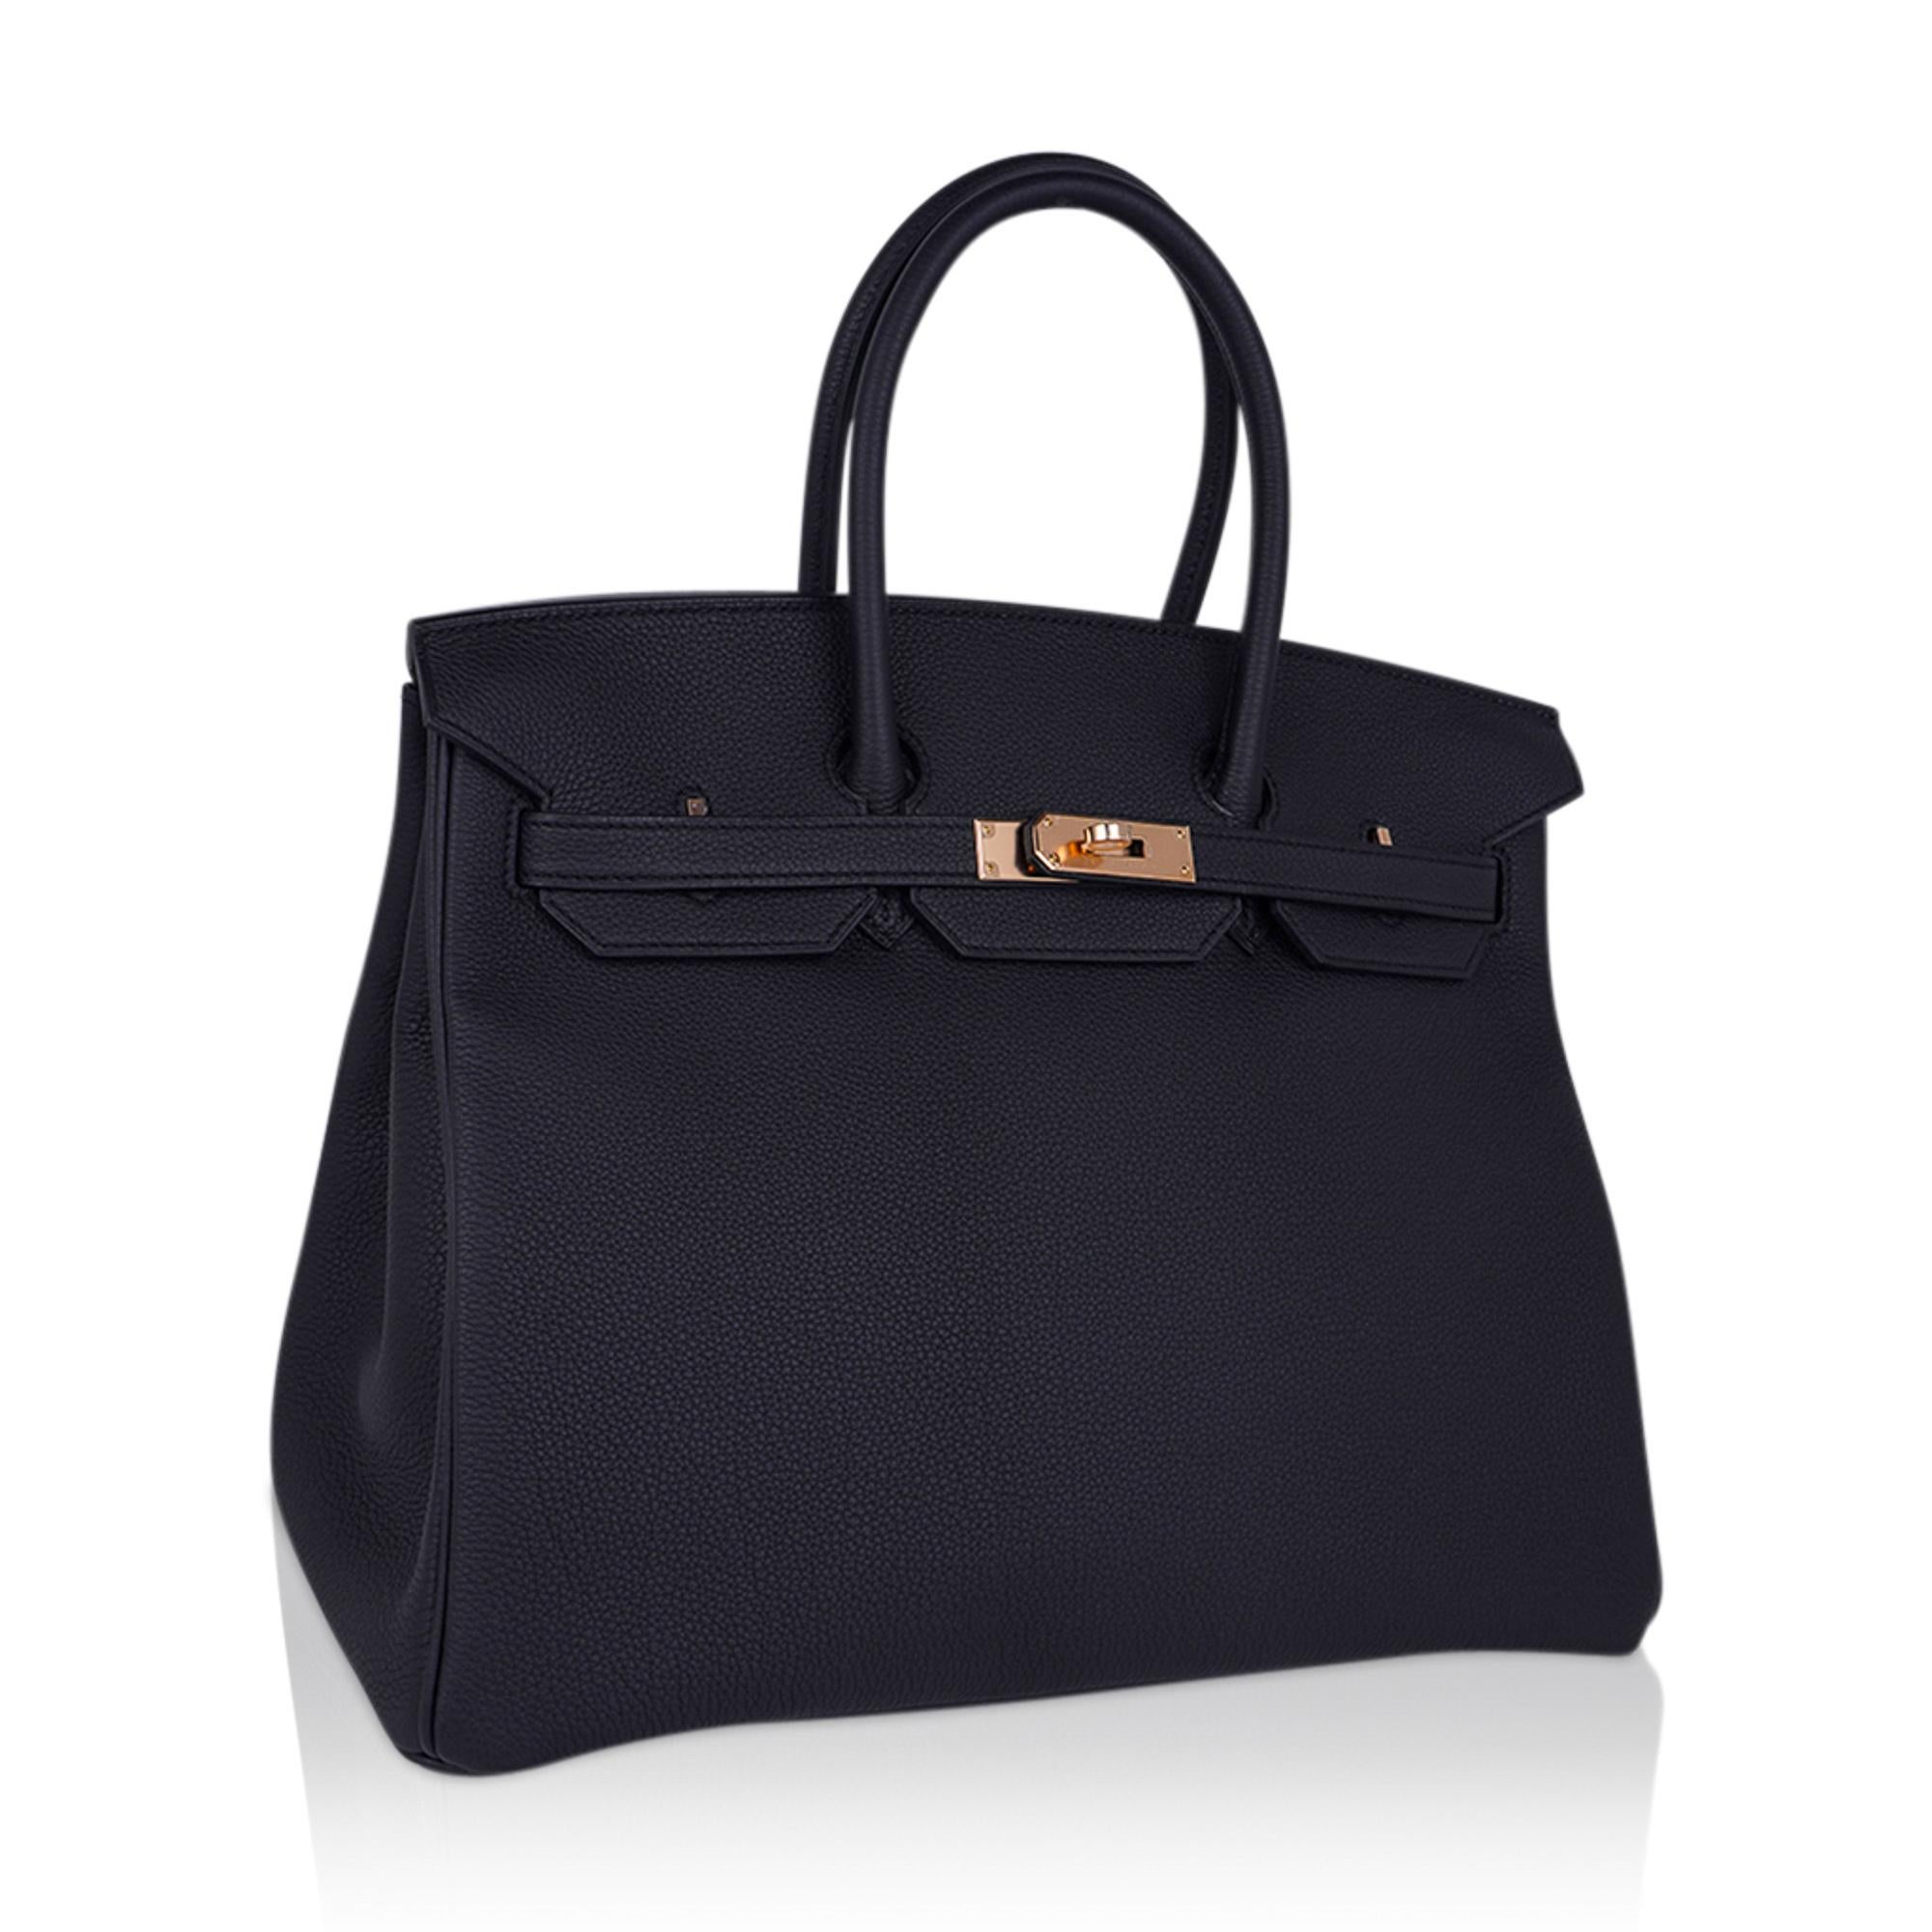 Mightychic offers a sleek classic Black Hermes Birkin 35 bag.
Rich and timeless with coveted rose gold hardware.
Togo leather is textured and resistant to scratches.
Accompanied by lock, keys, clochette, sleepers and raincoat.
NEW or NEVER